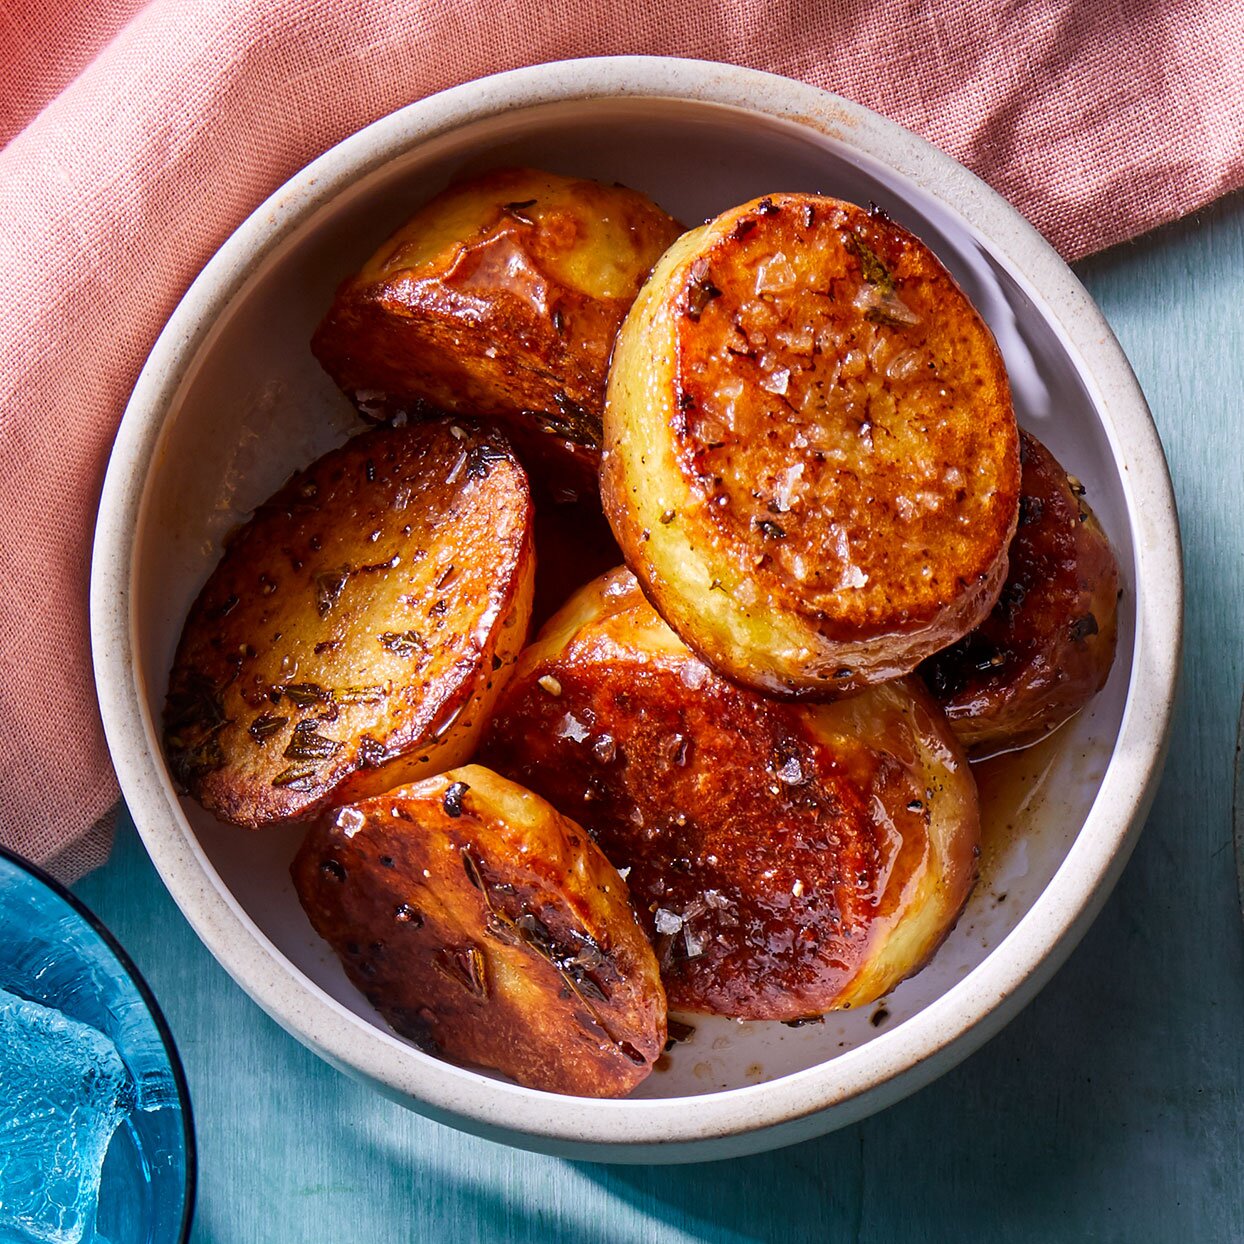 Melting Potatoes Are the Ultimate Combination of Creamy and Crispy